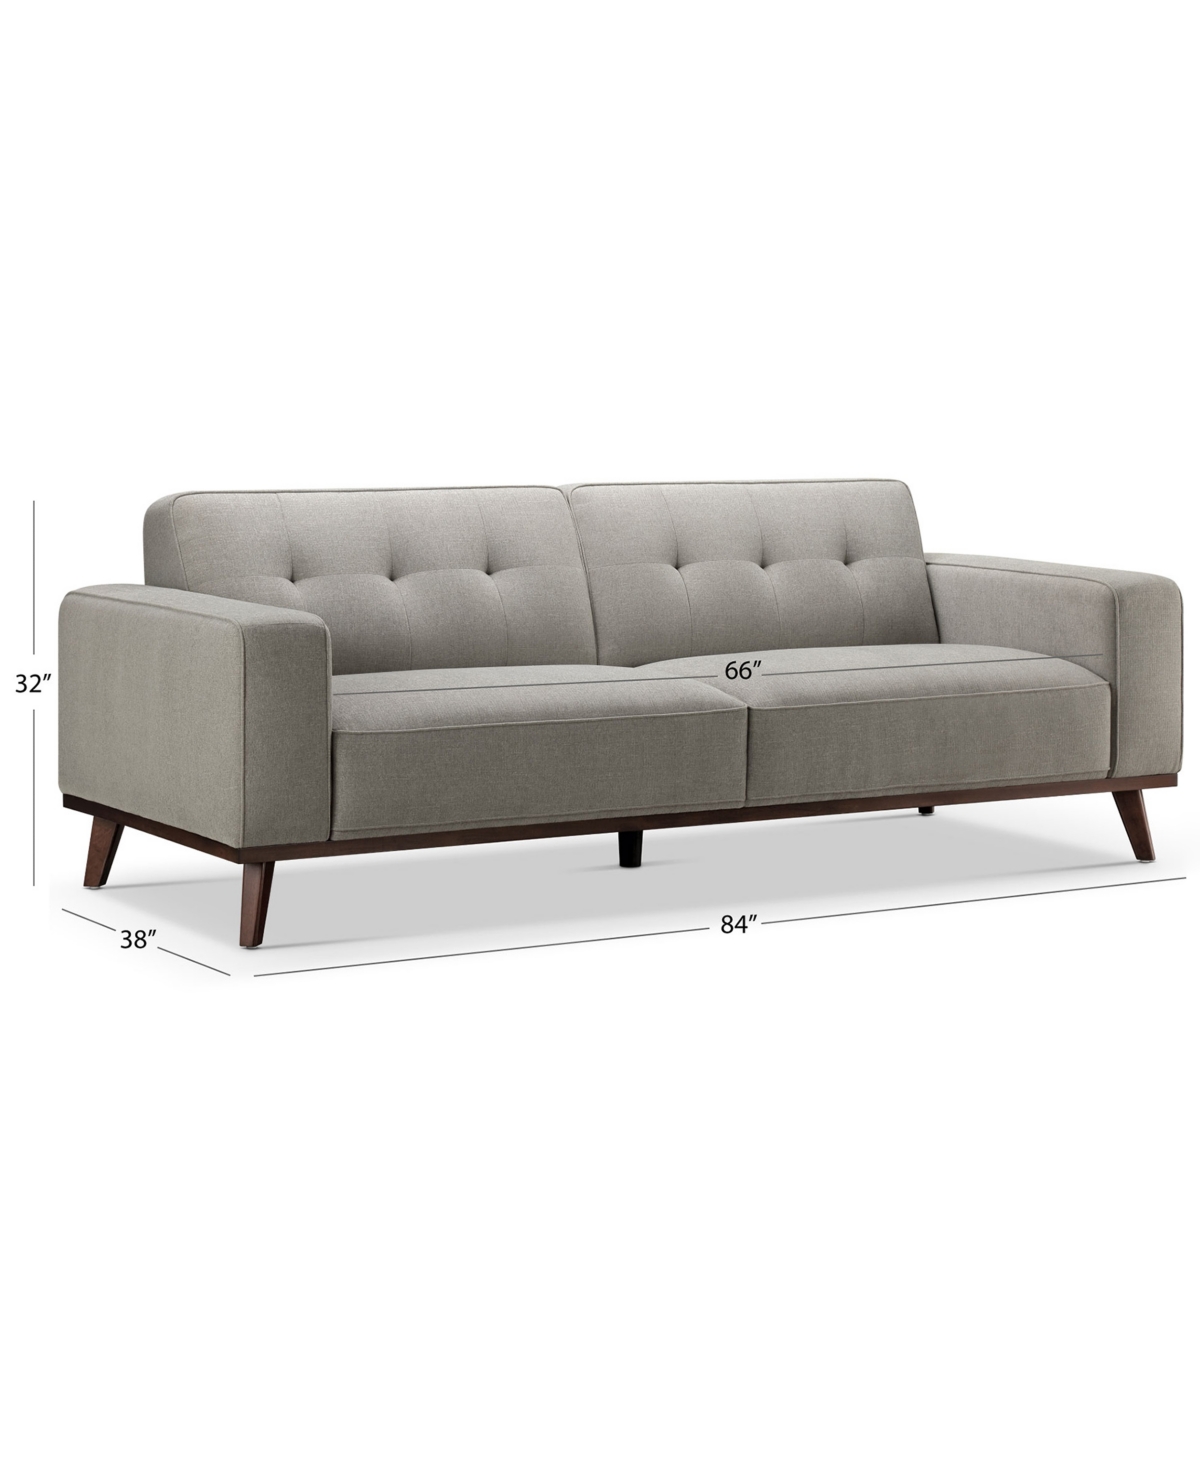 Shop Abbyson Living Vicenza 84" Mid-century Upholstered Sofa In Gray